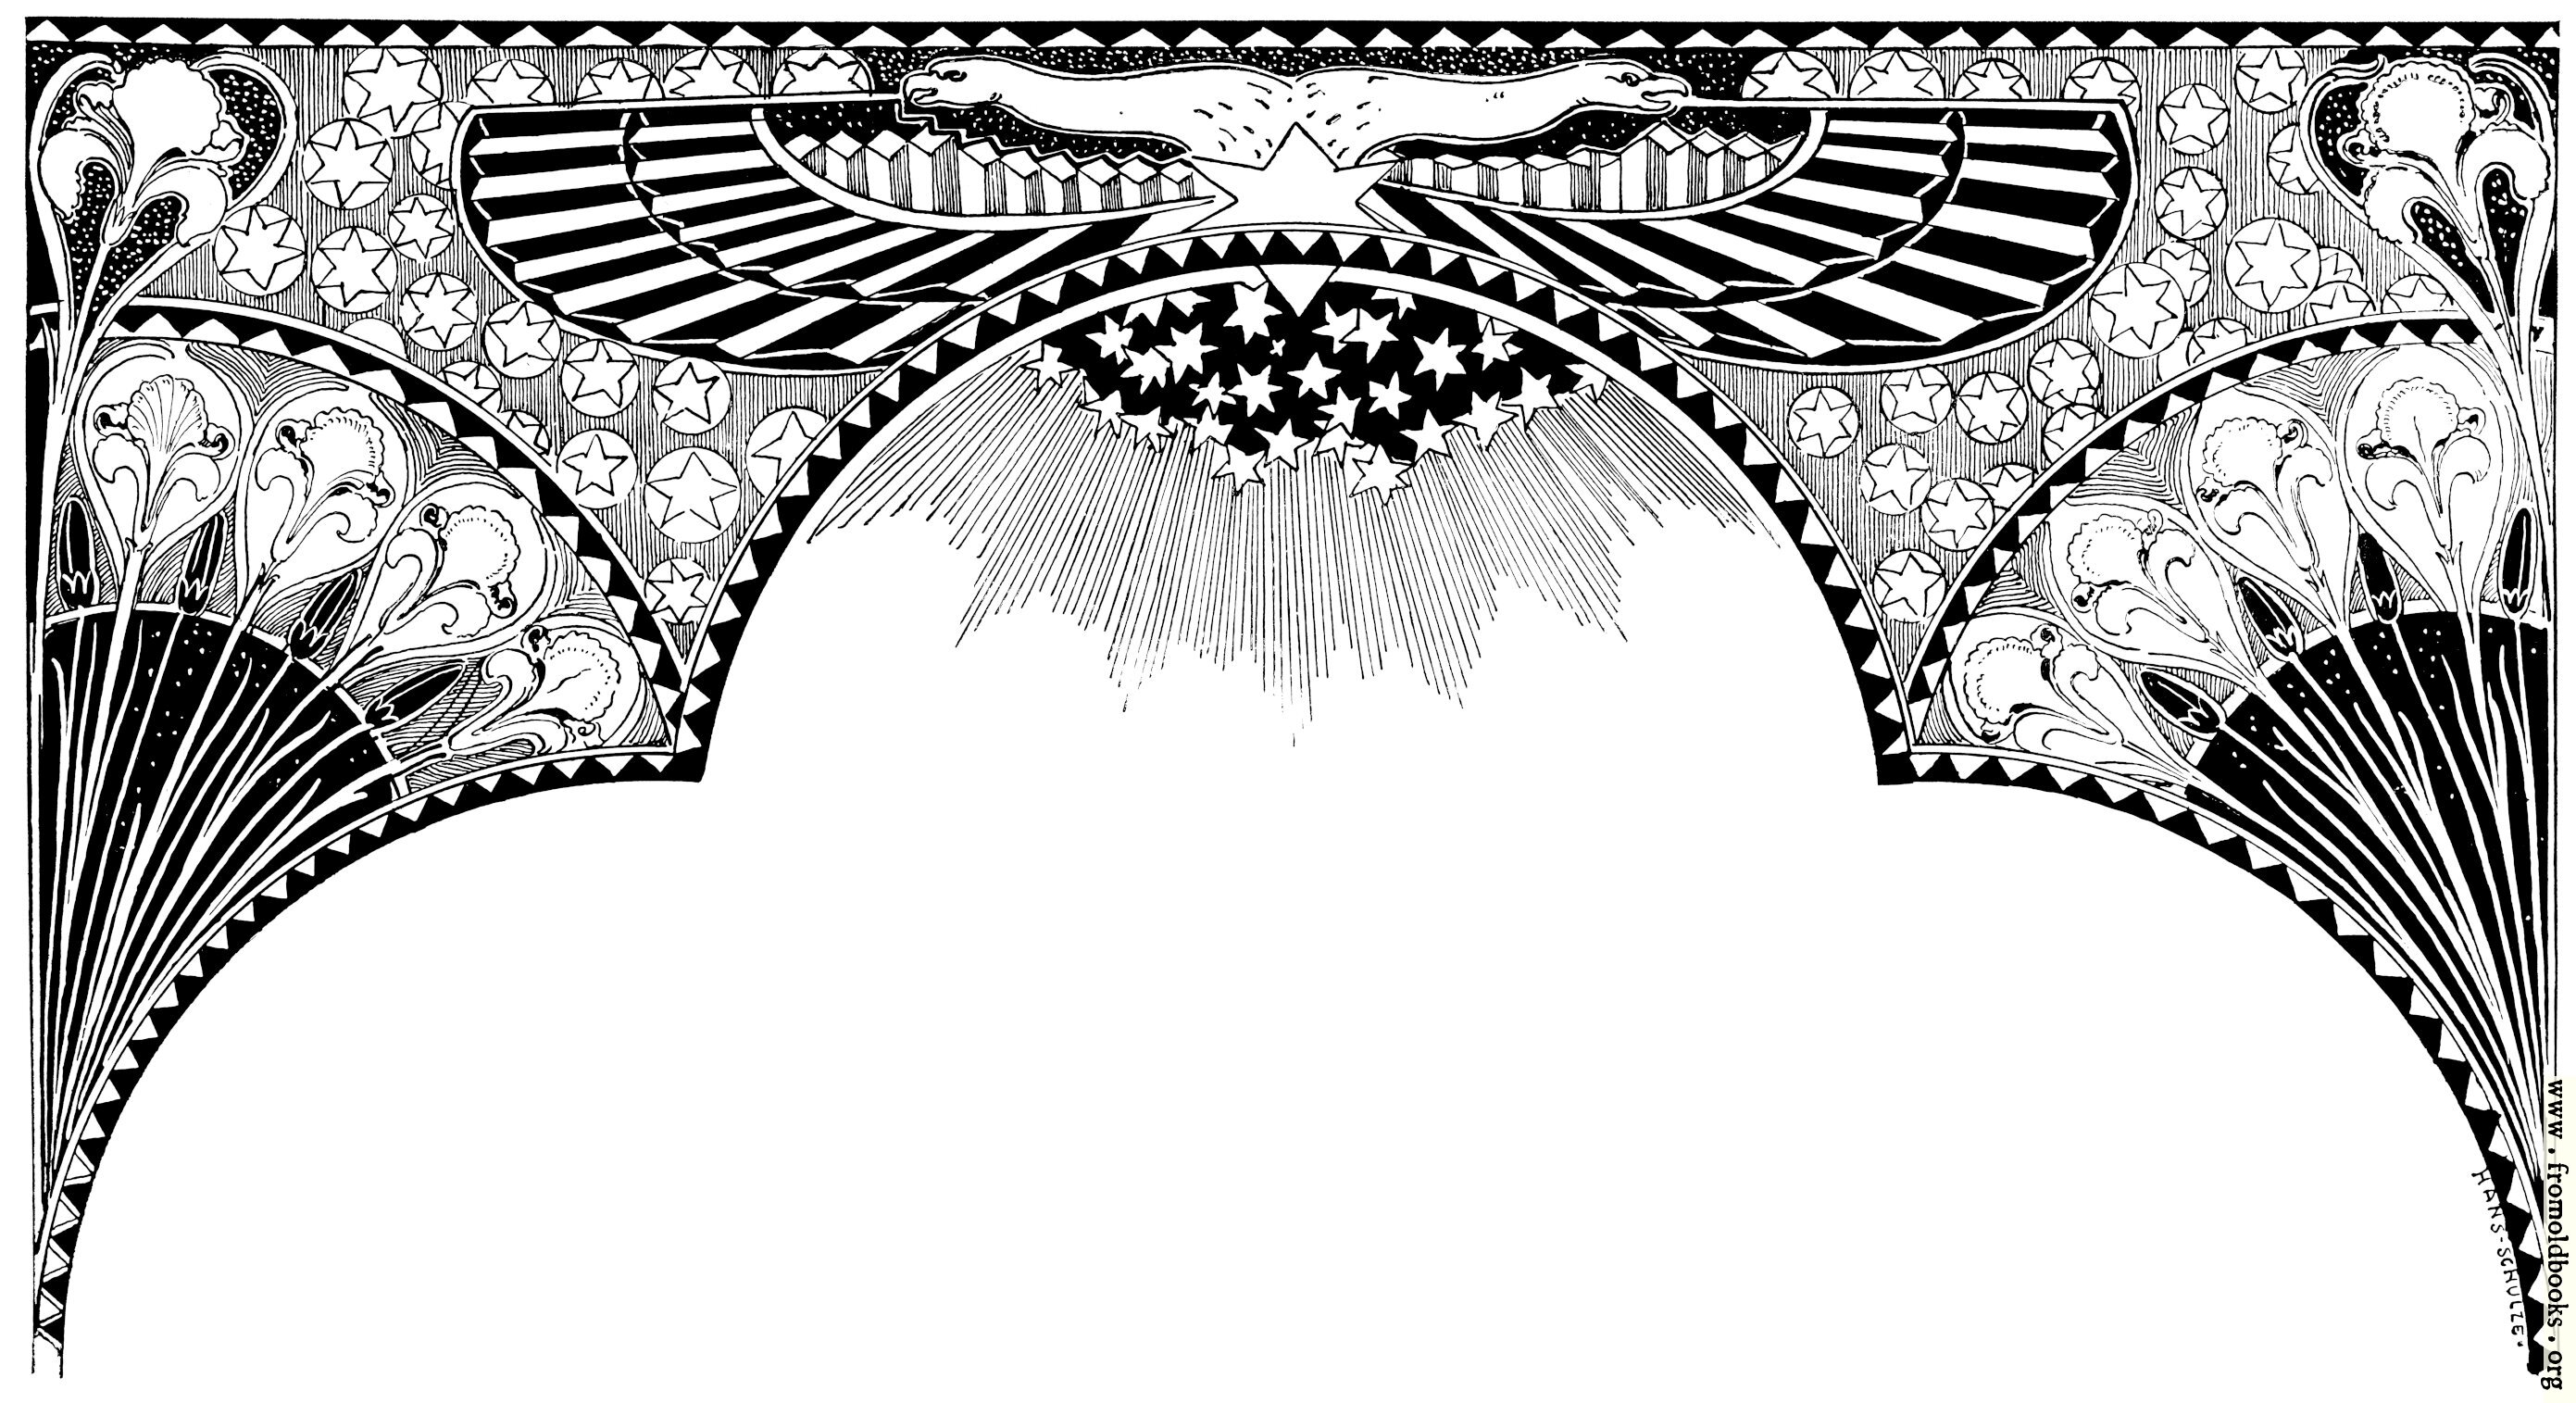 [Picture: Patriotic Border With Stars, Stripes, Eagles]